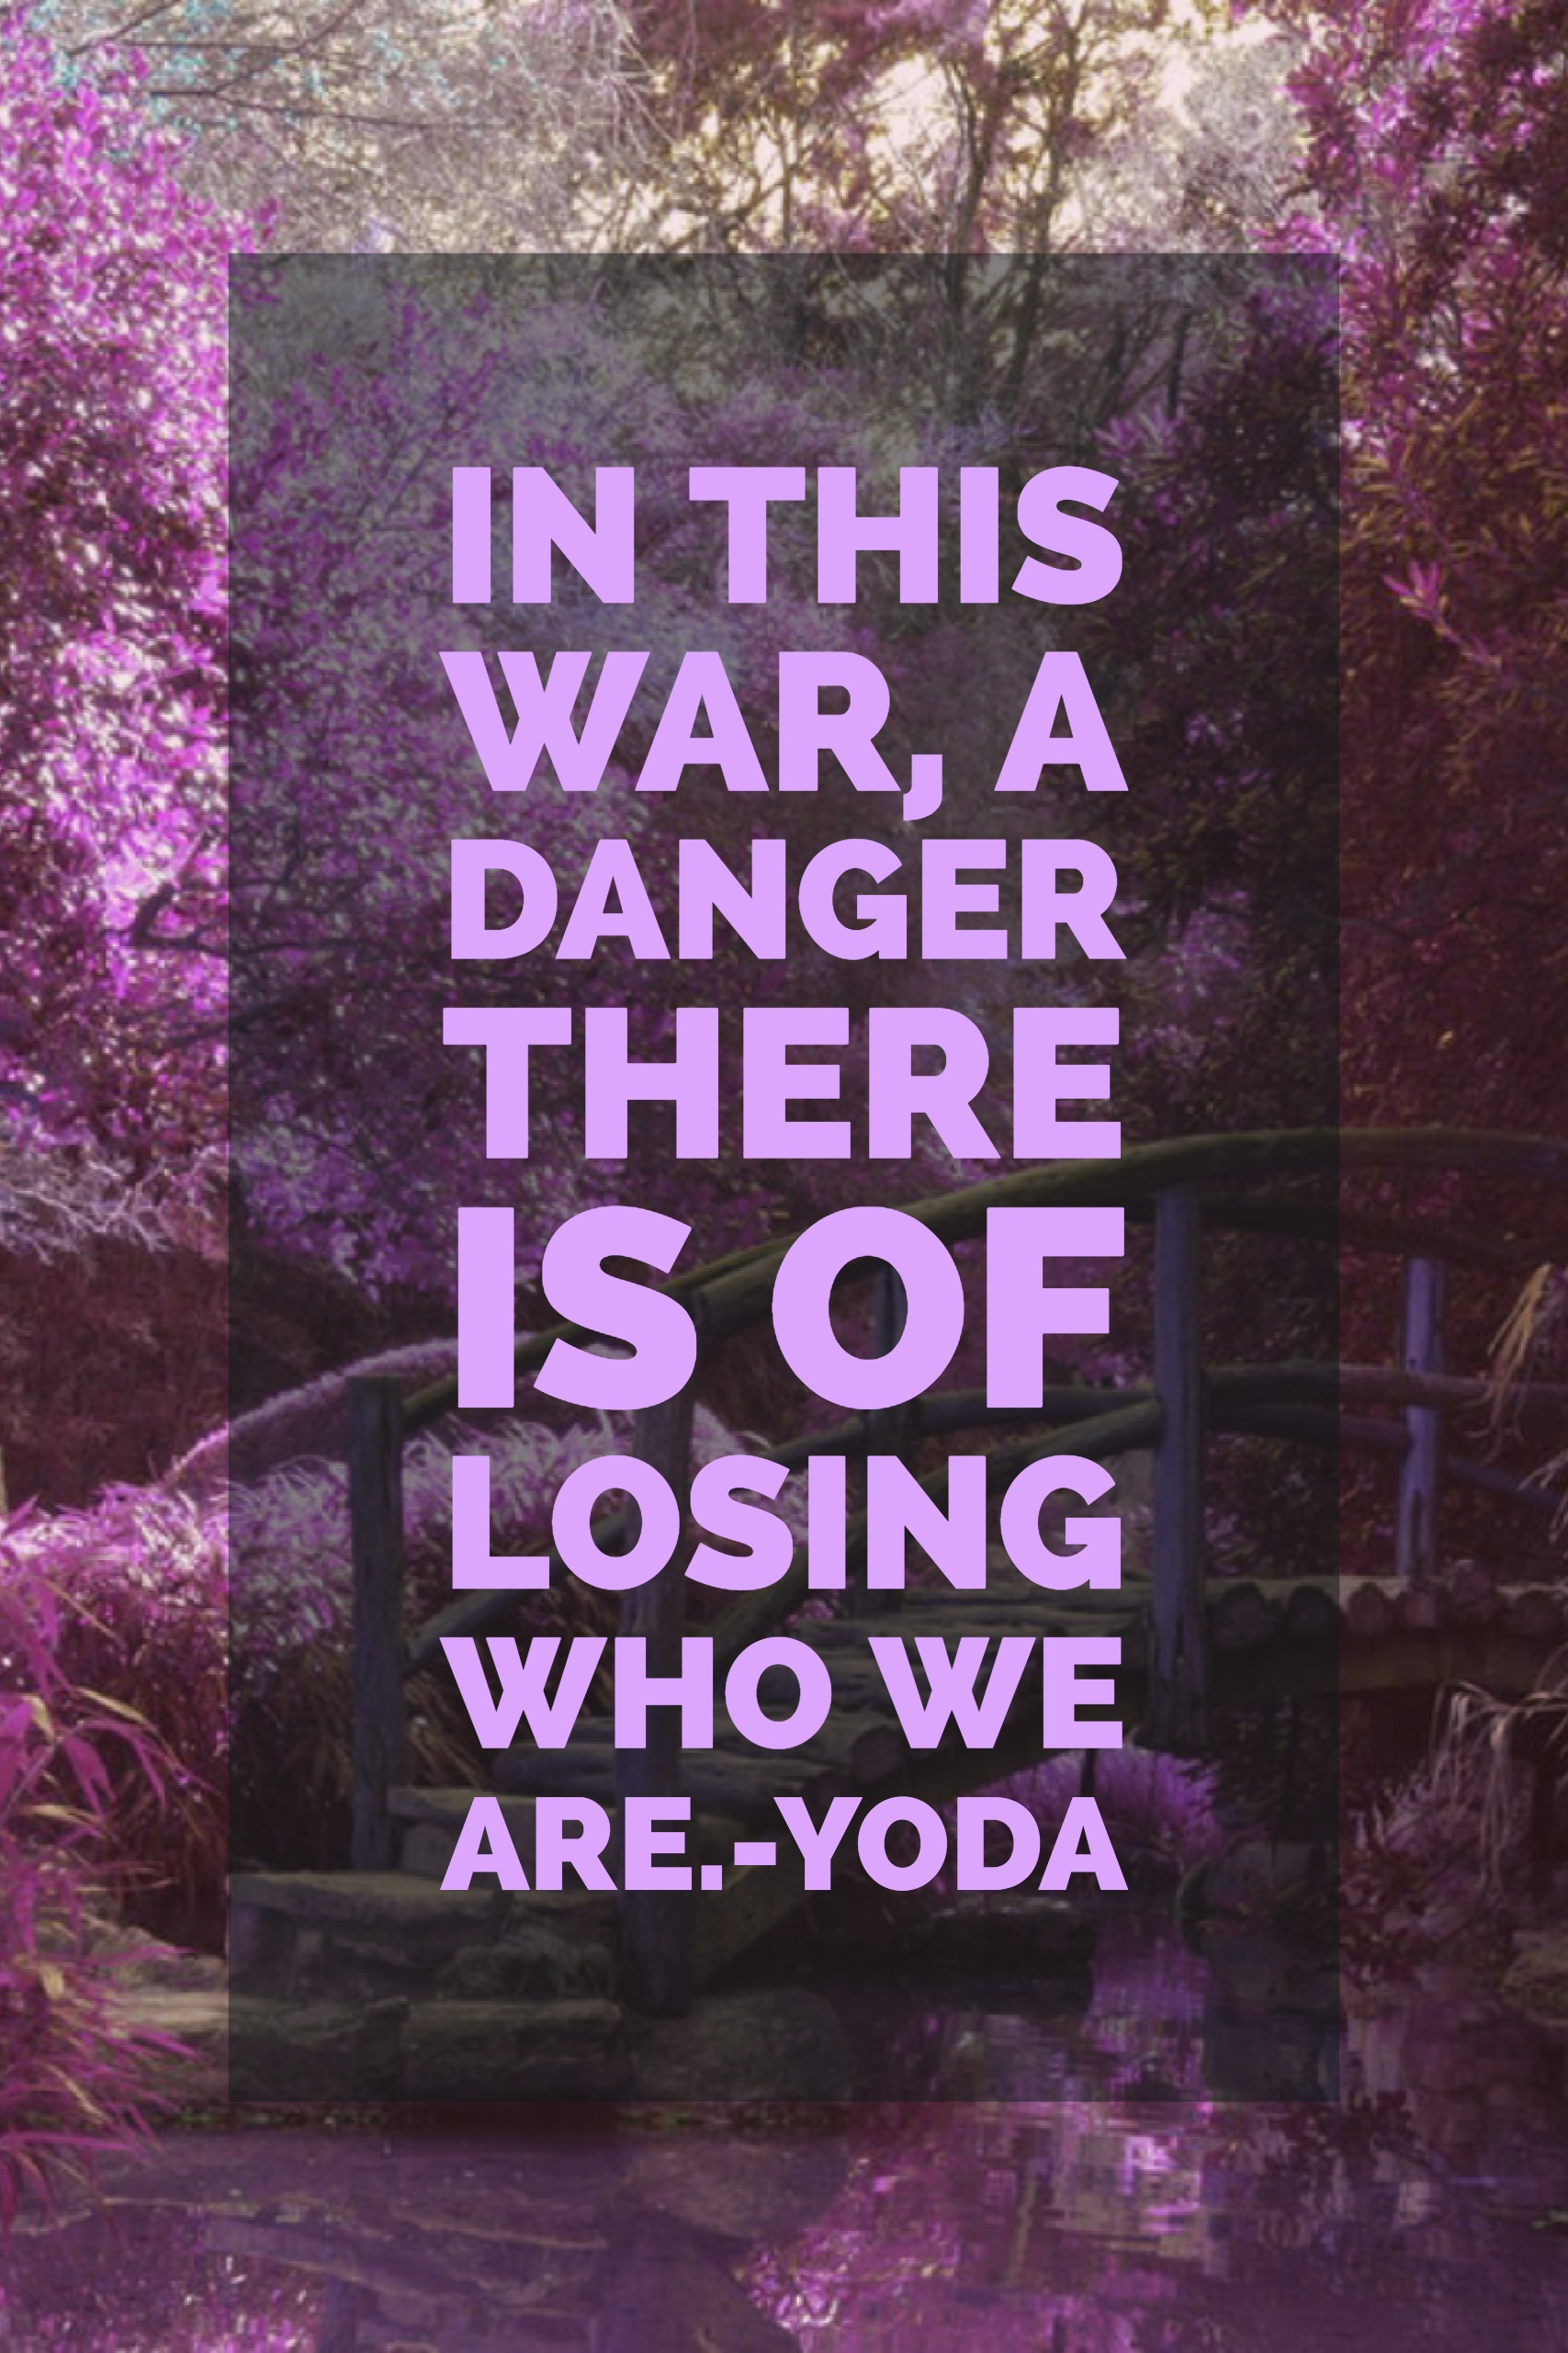 In this war, a danger there is of losing who we are.-Yoda